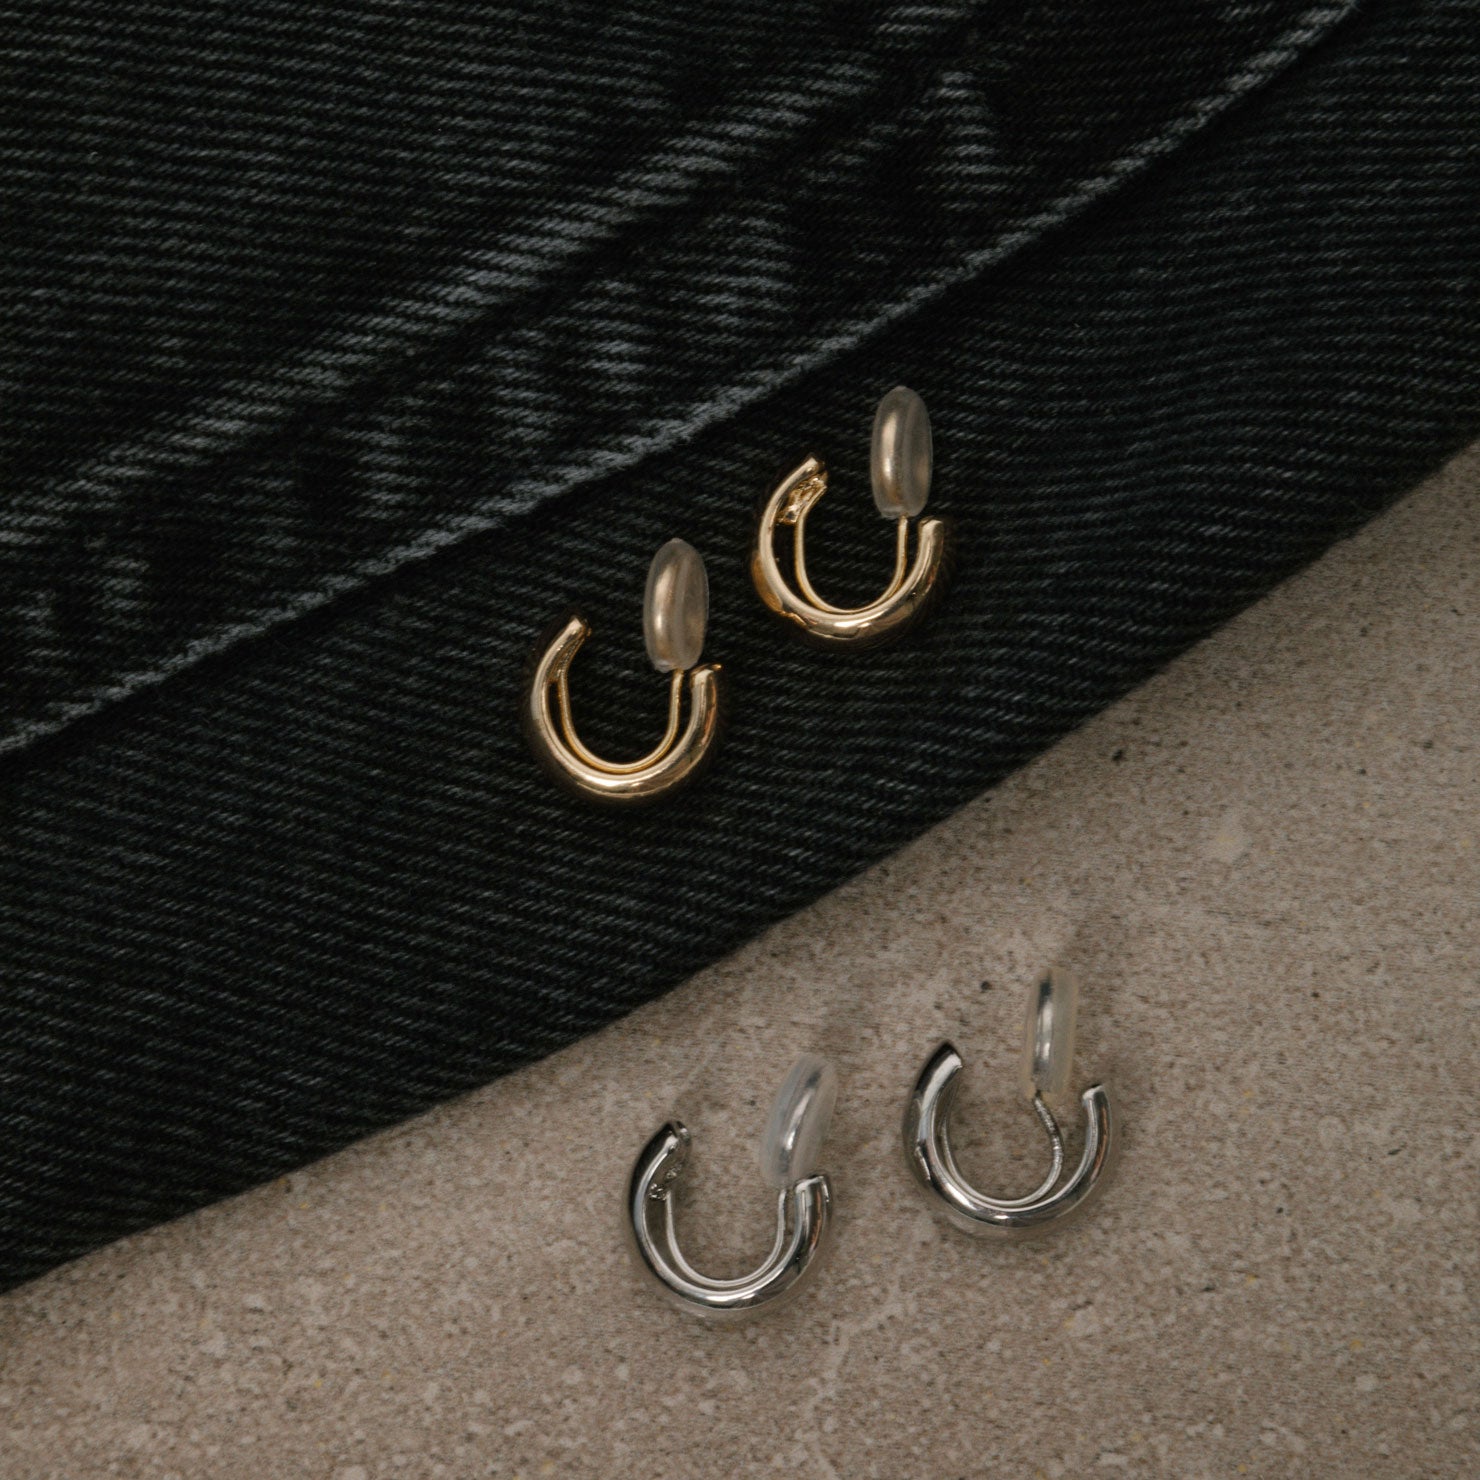 Image of the Small Hoop Clip-On Earrings in Silver offer medium-secure hold for up to 24 hours. Crafted from copper alloy, they feature a mosquito coil closure and can be adjusted to fit various ear types. One pair per order.